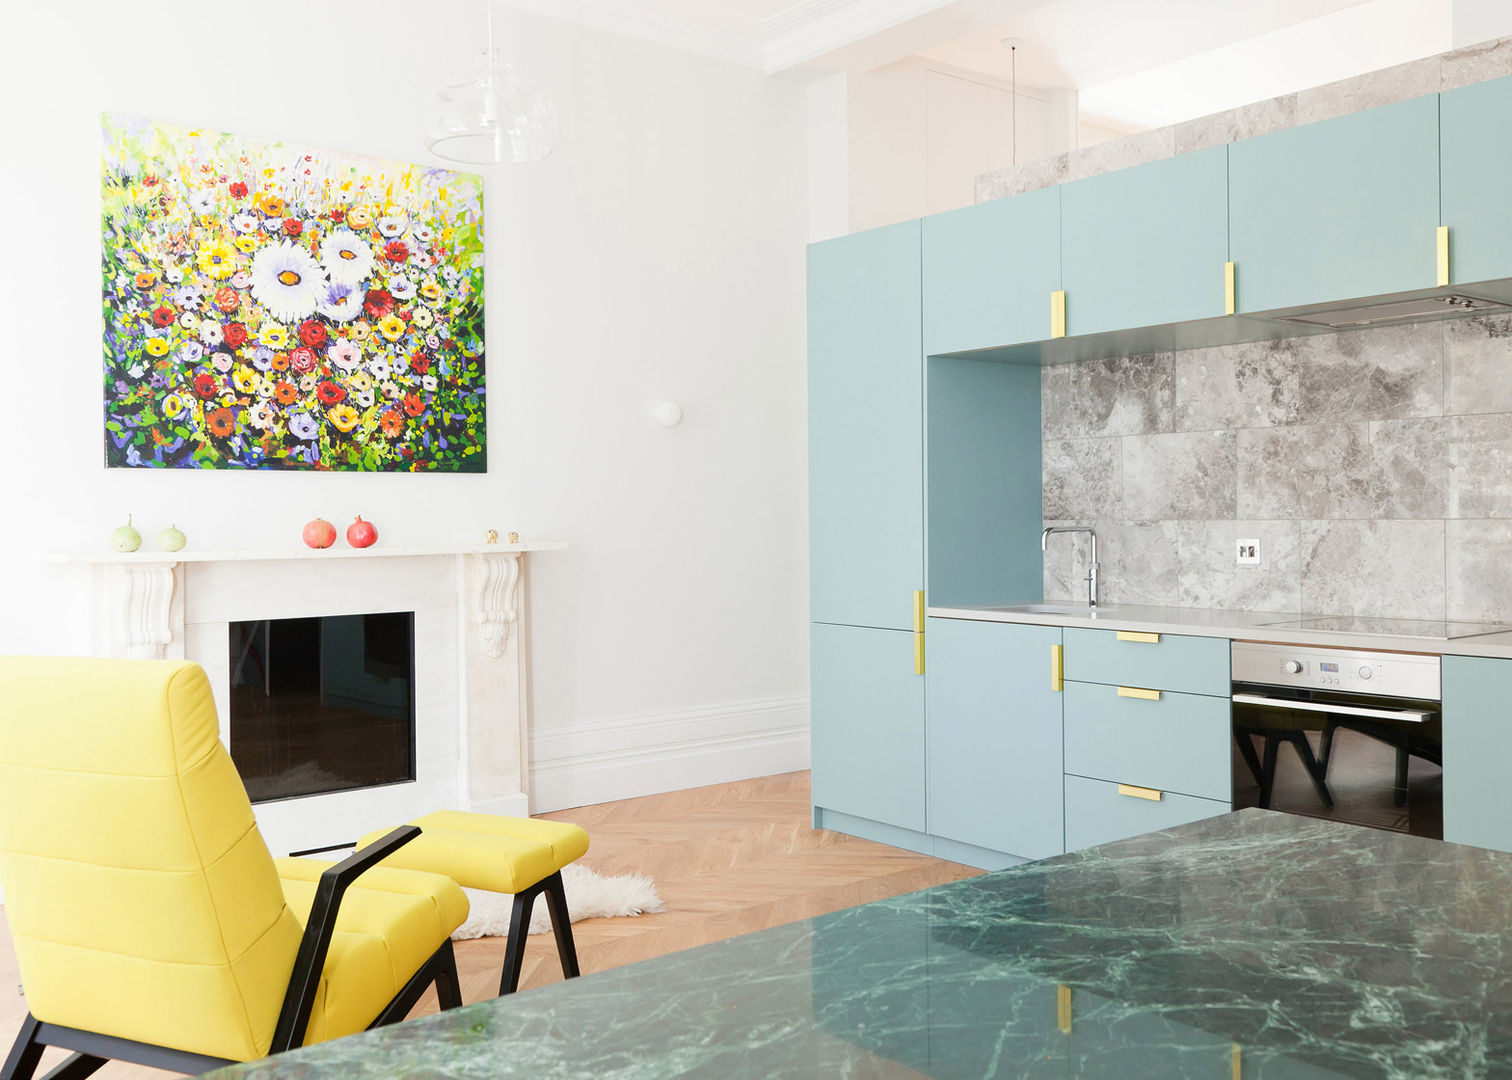 Westbourne Gardens NAKED Kitchens Modern style kitchen yellow chair,blue cabinets,gold handles,miele,oven,floral artwork,fireplace,modern,open plan,contemporary,mottled grey tiles